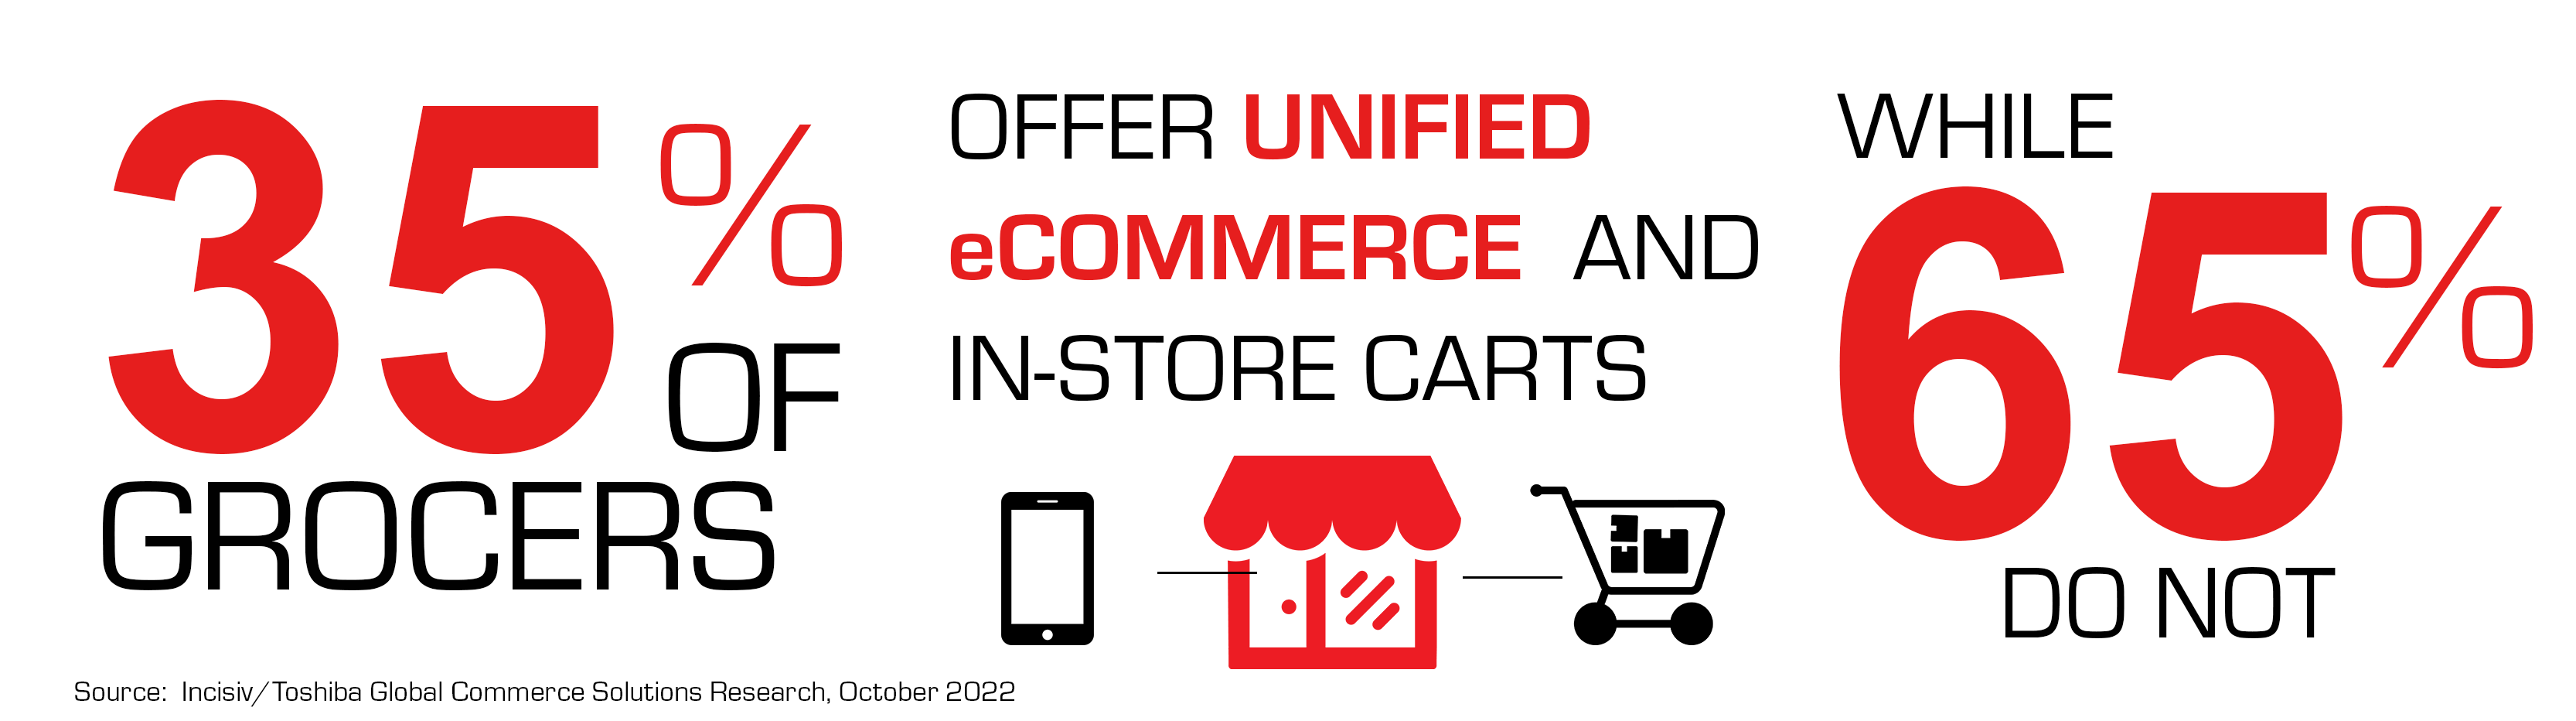 Unified eCommerce and In-Store Carts